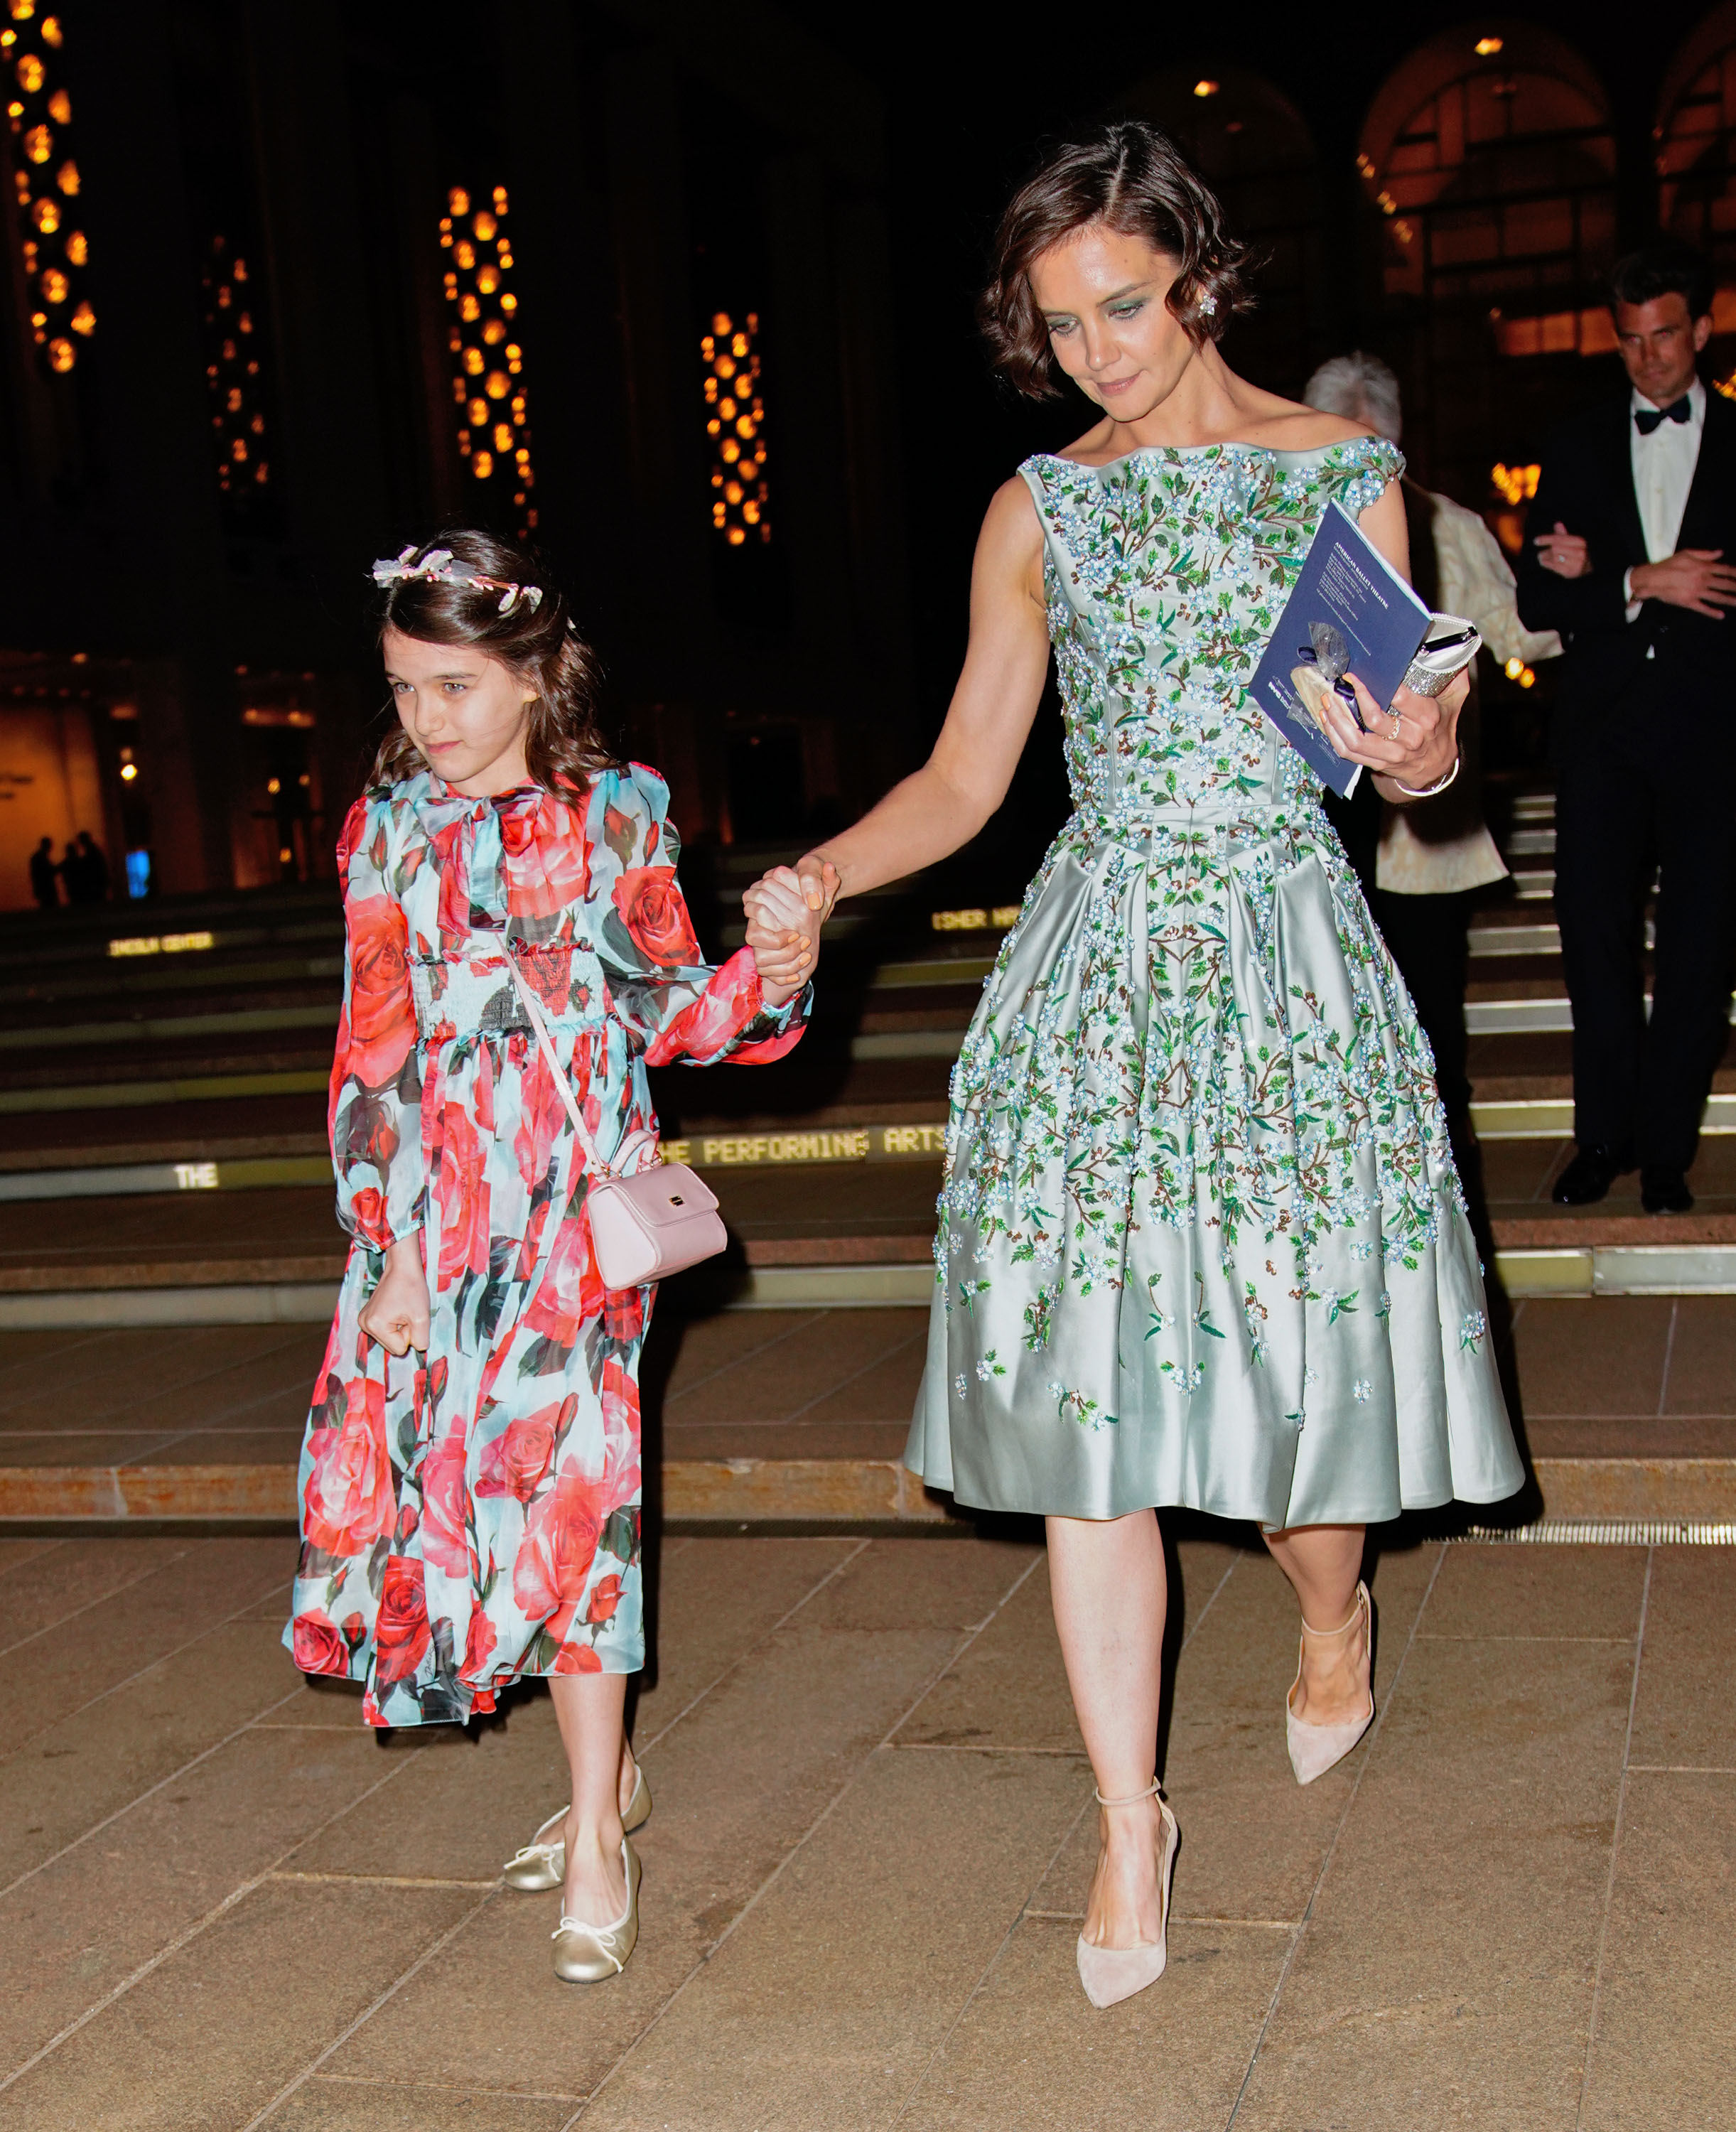 Suri Cruise and Katie Holmes at the American Ballet Theater on May 21, 2018 in New York City. | Source: Getty Images